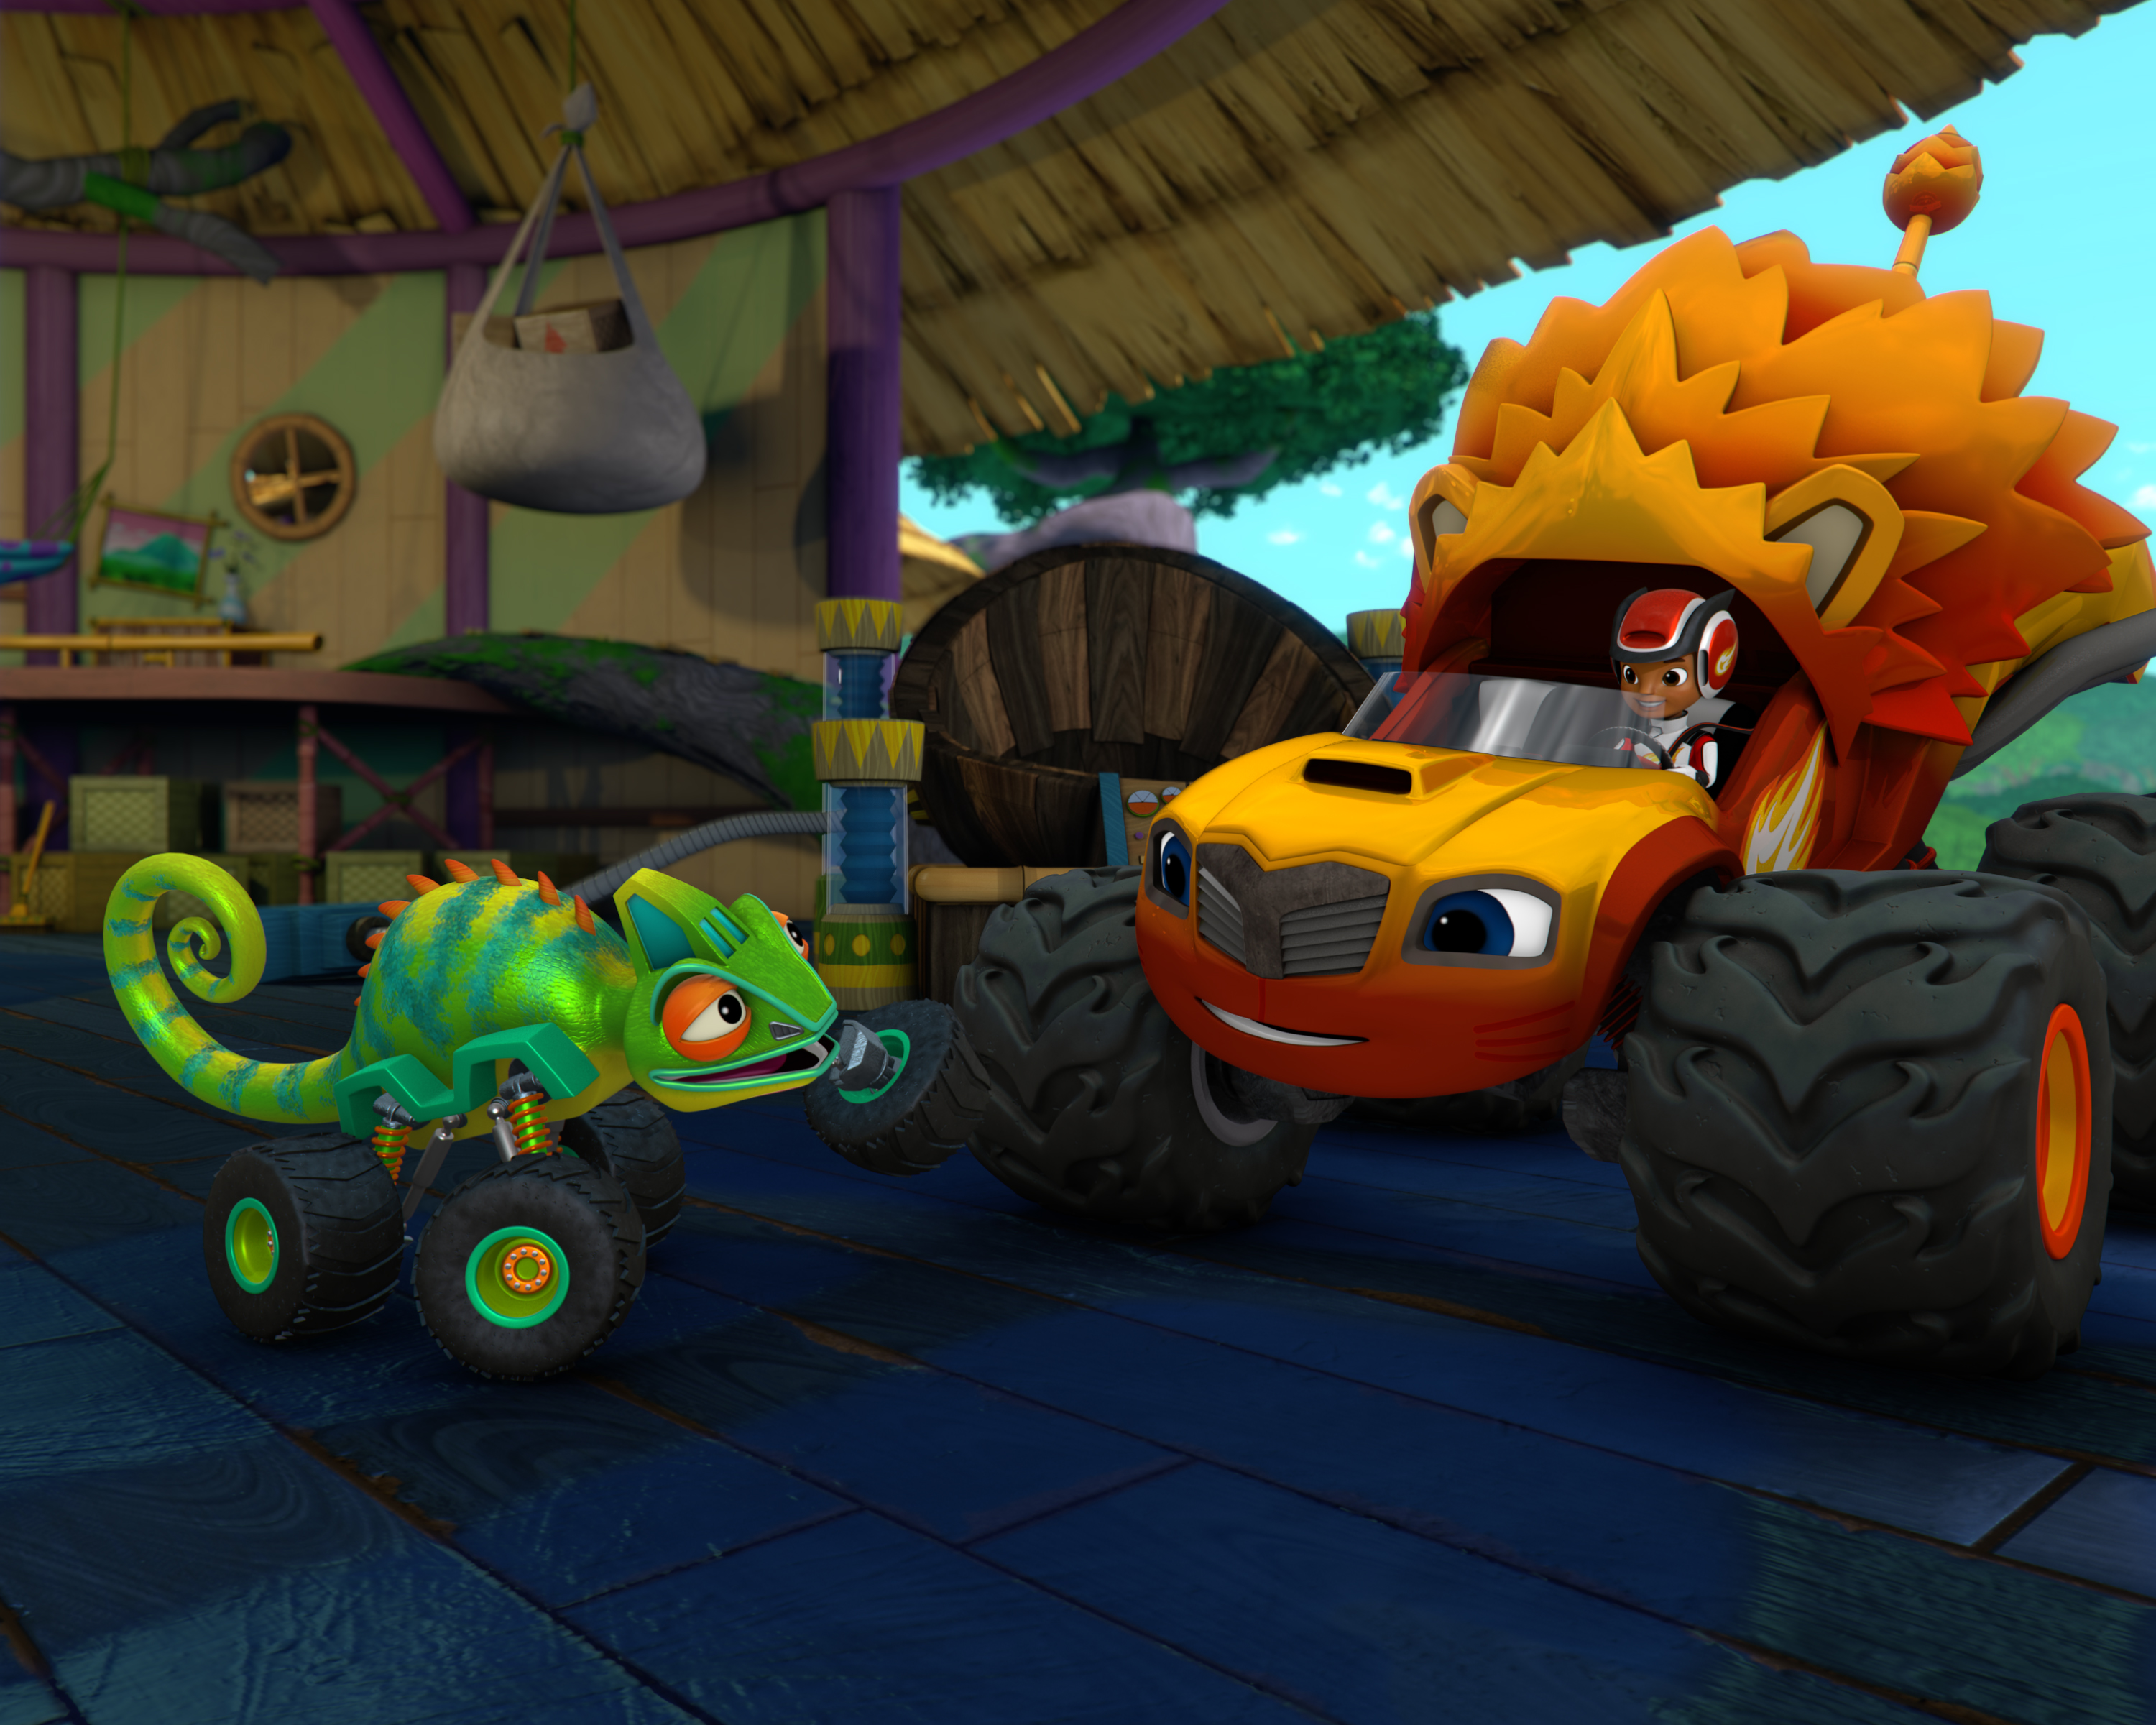 Billy Ray Cyrus as Lazard on Blaze and the Monster Machines; Photo courtesy Nickelodeon